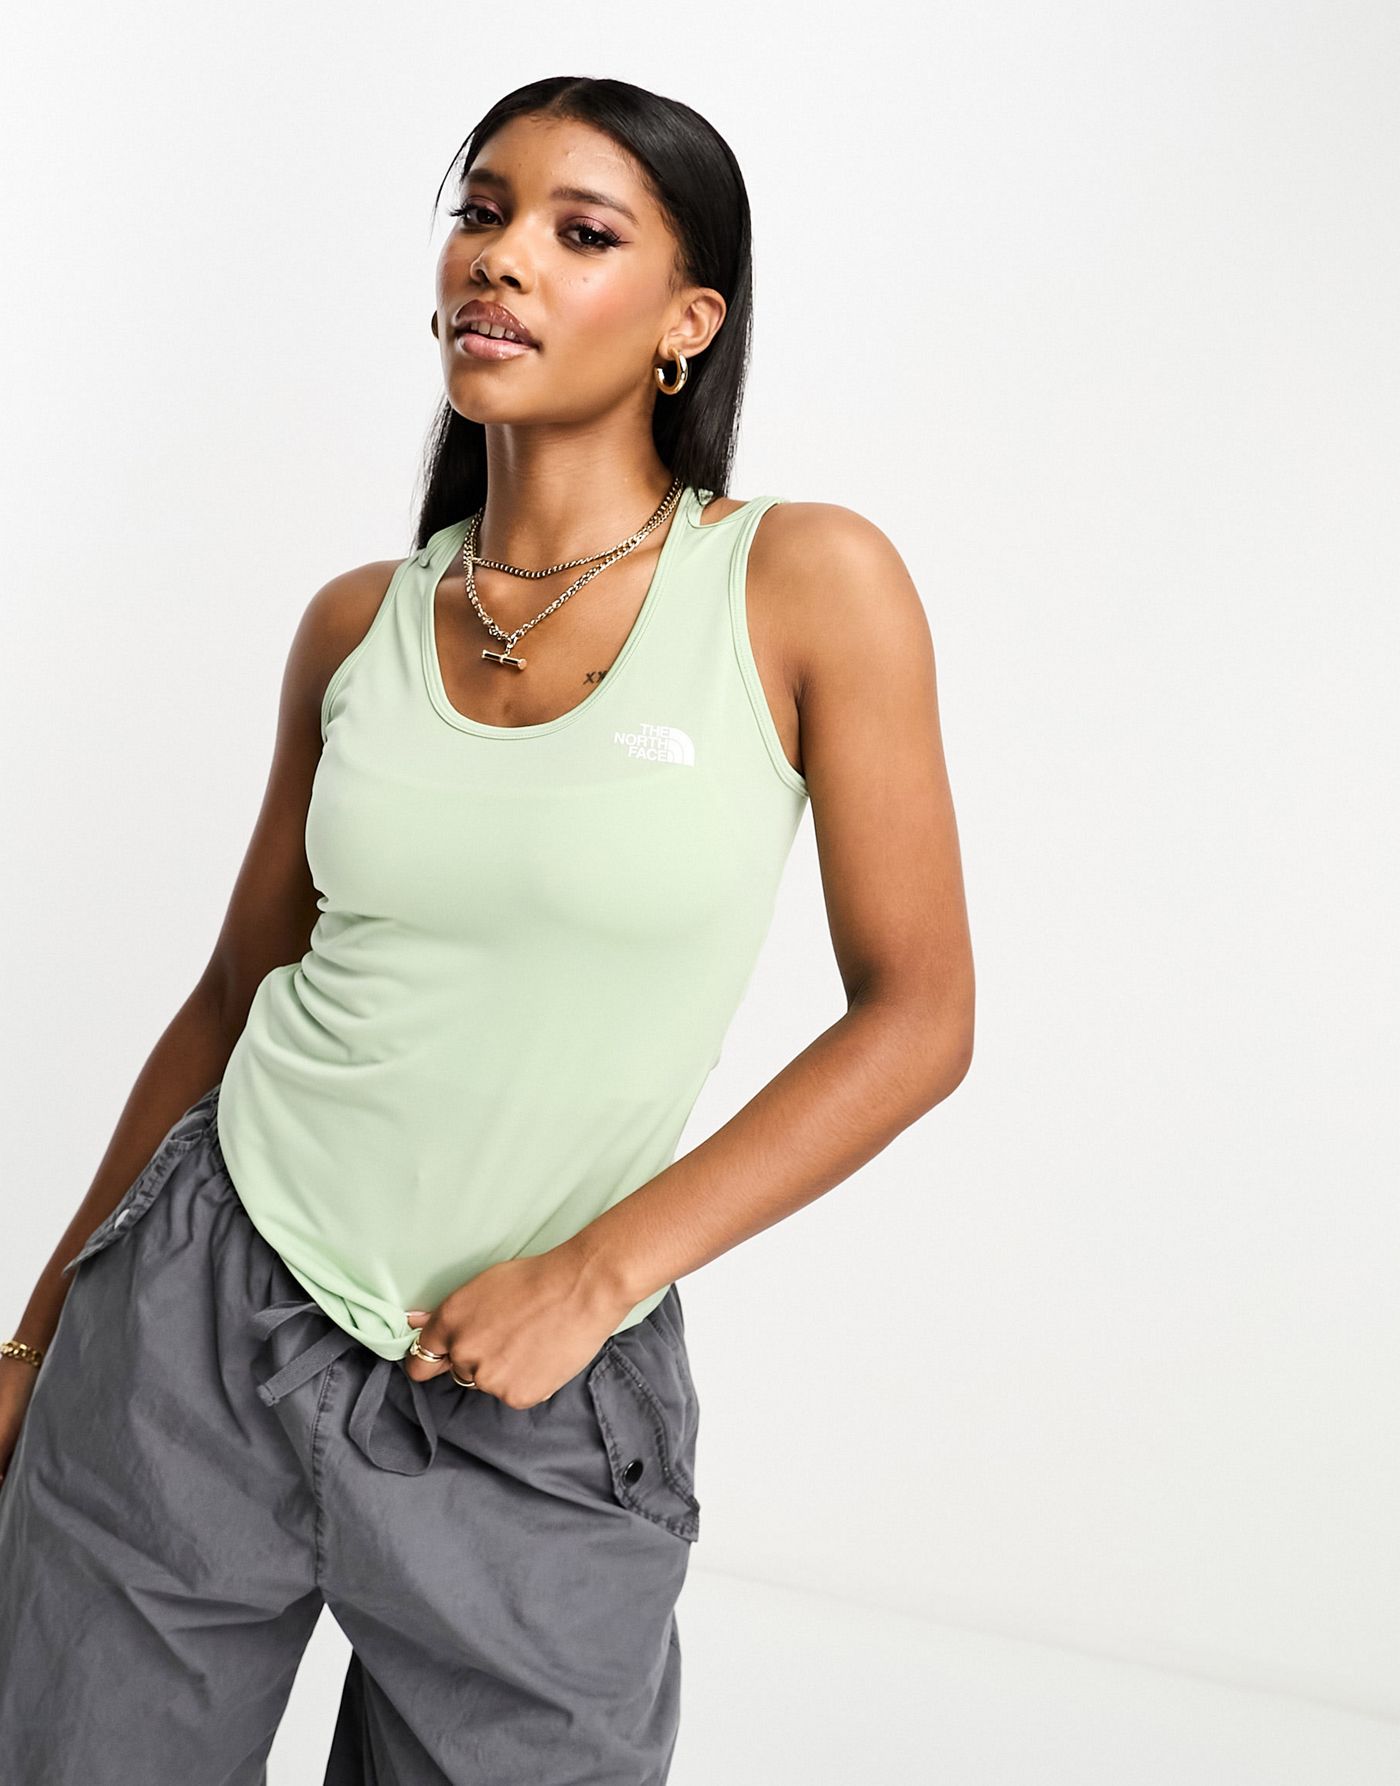 The North Face Training Flex tank top in sage green